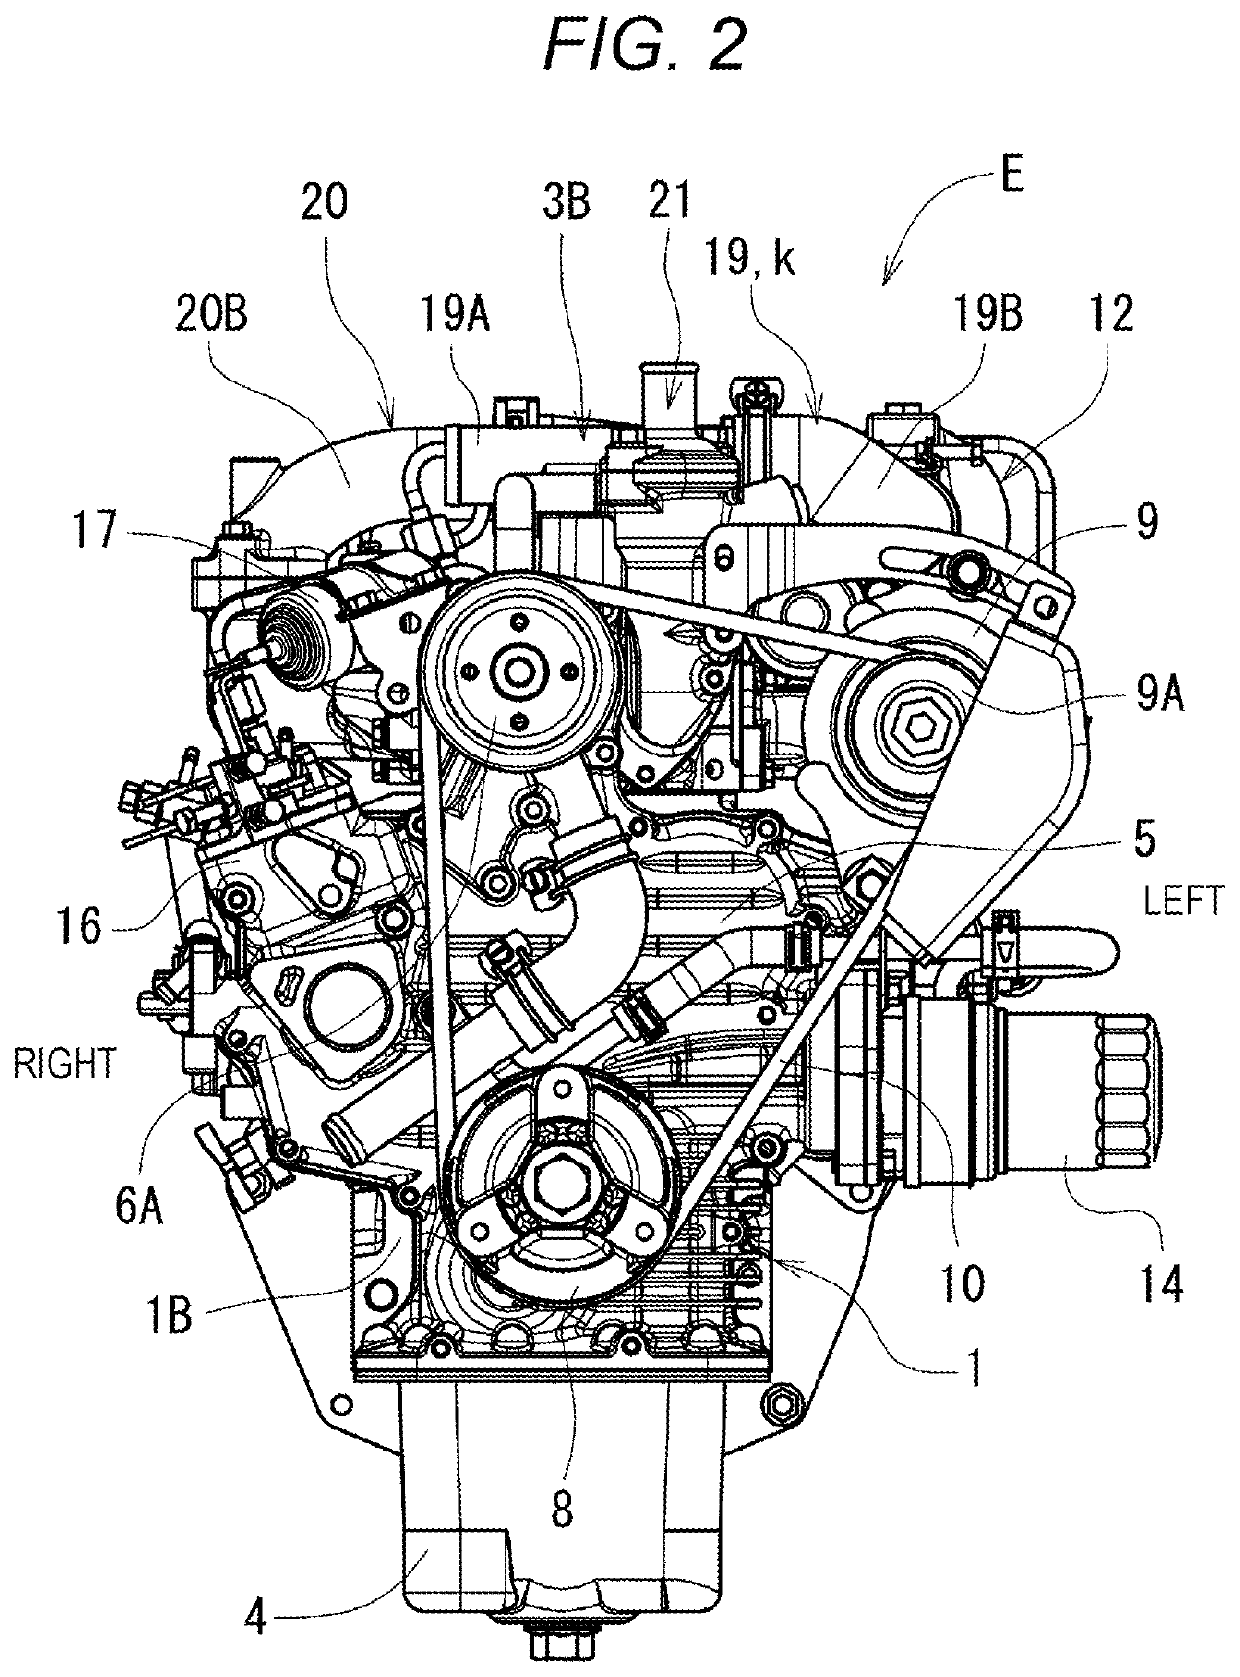 Engine that includes blow-by-gas returning system